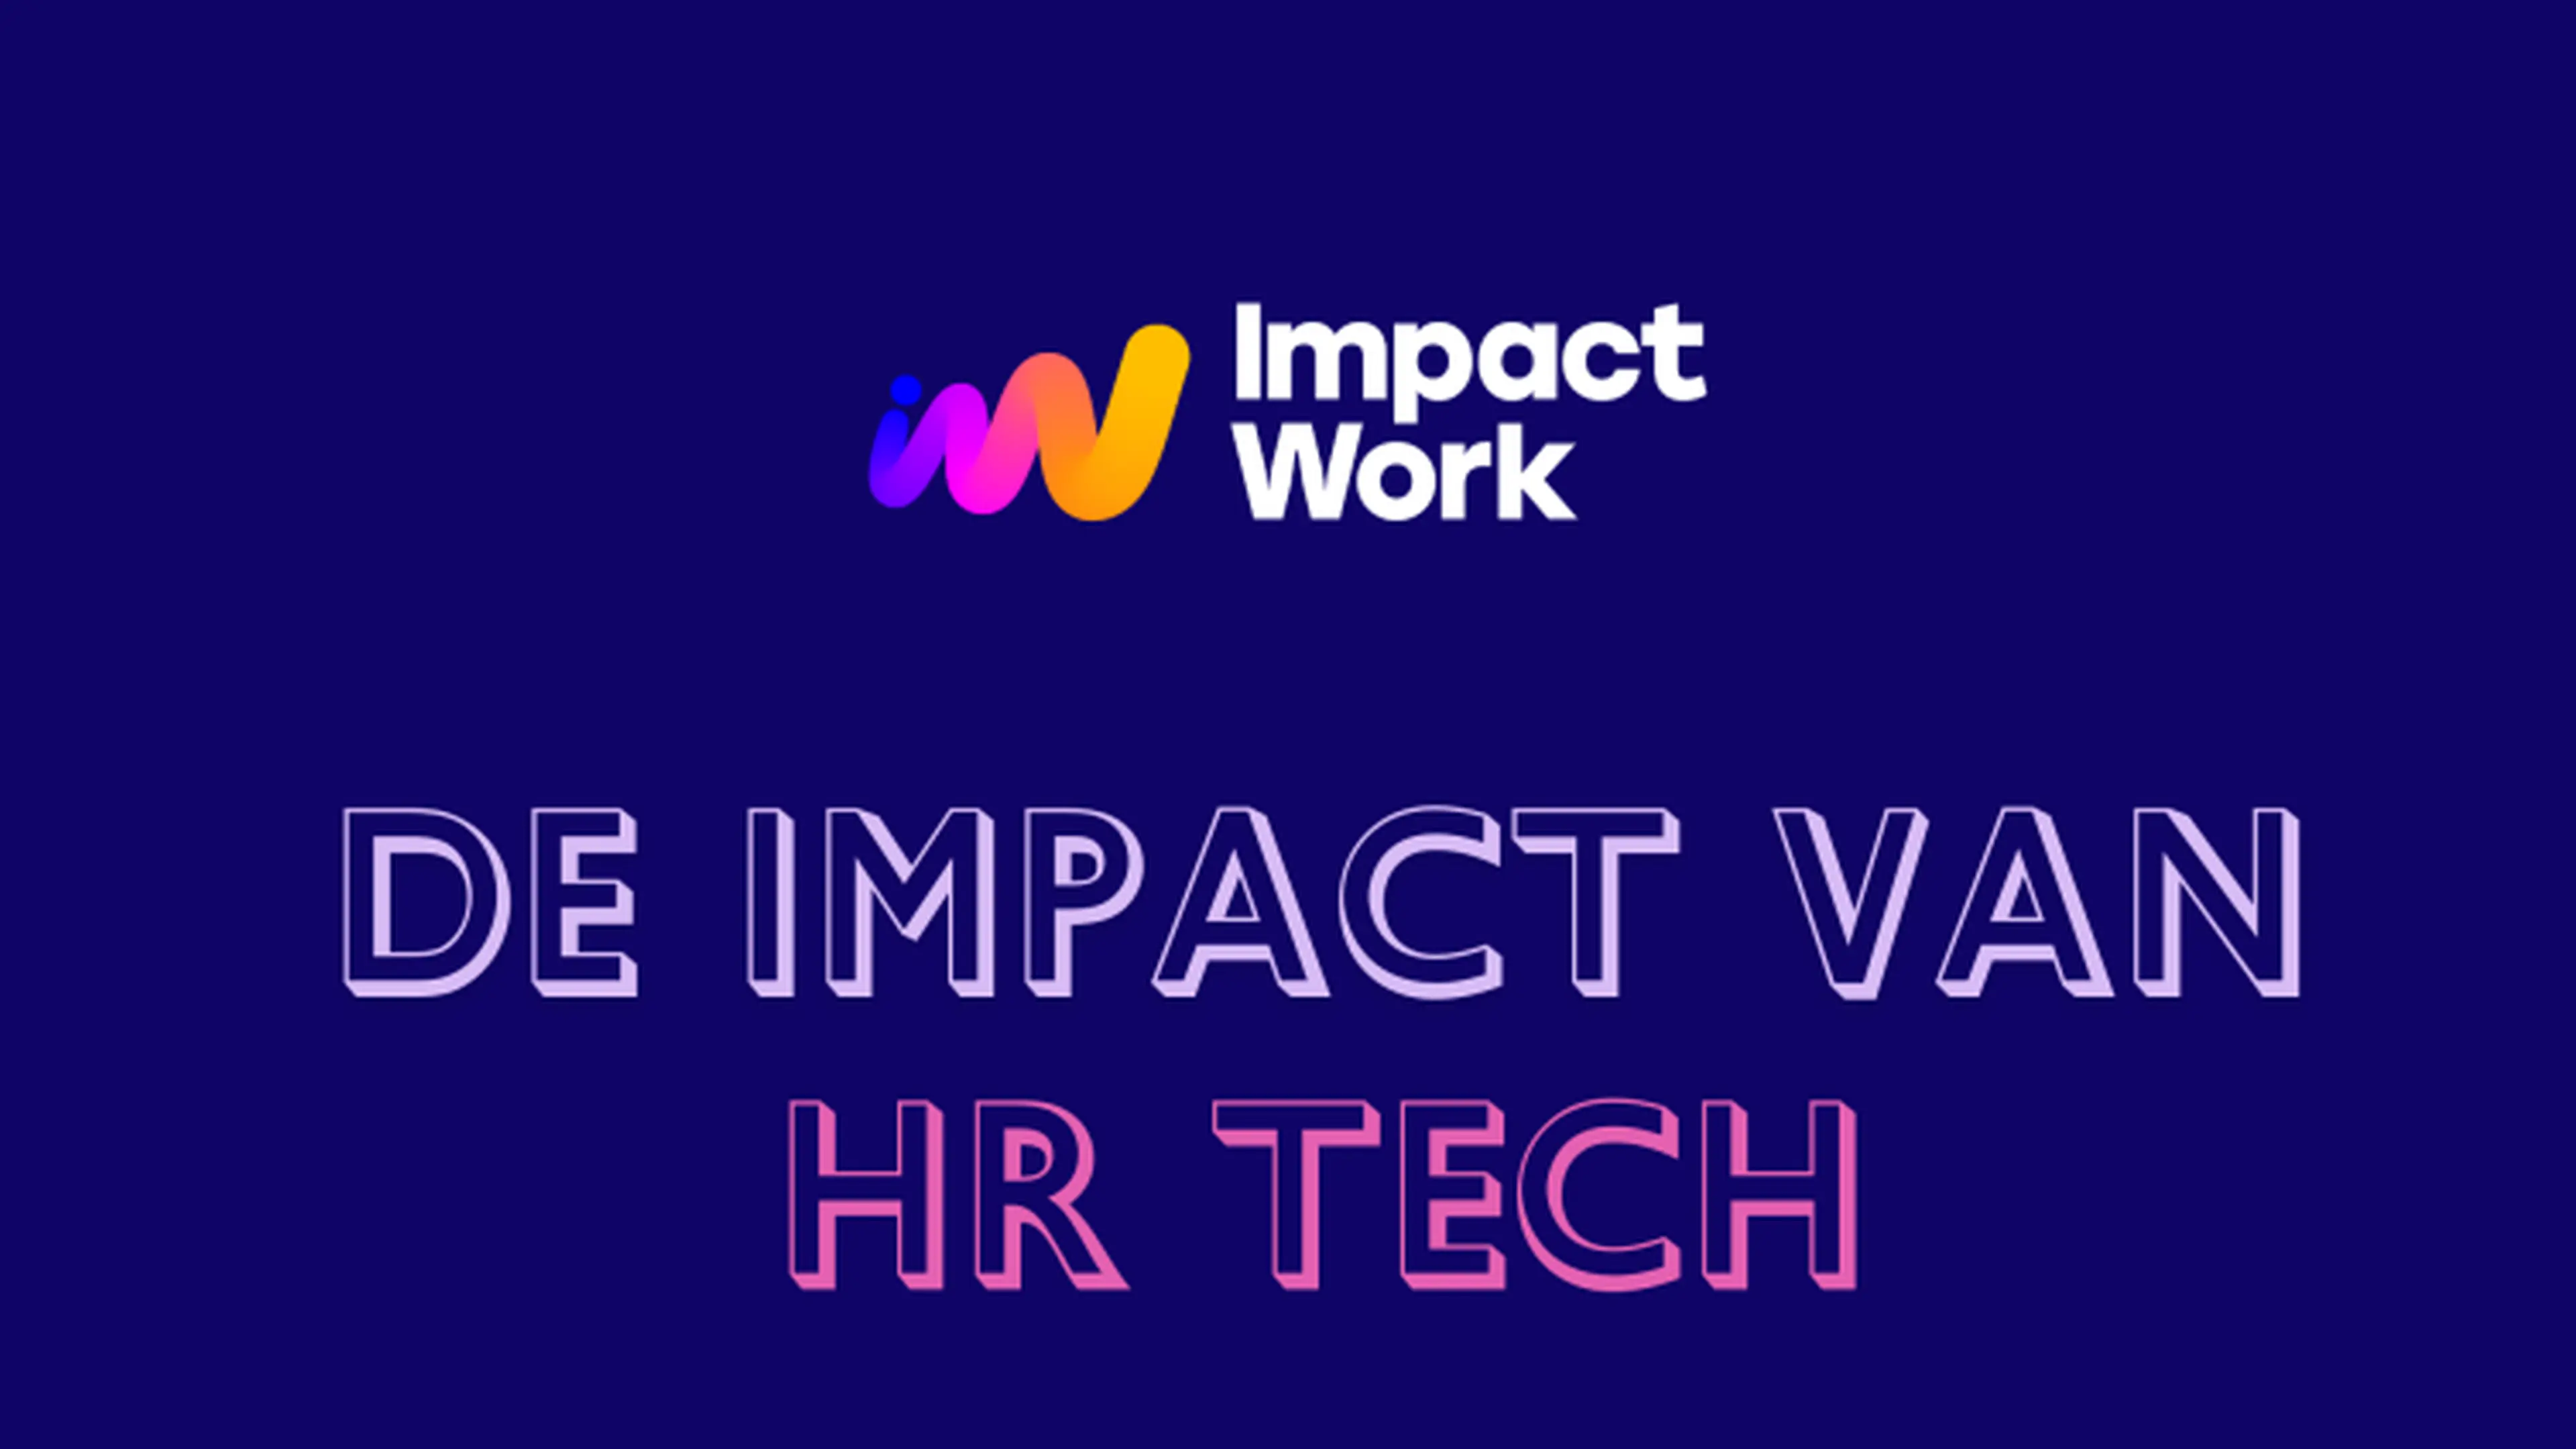 Hero image with the logo of Impact Work and text "De Impact Van HR Text"